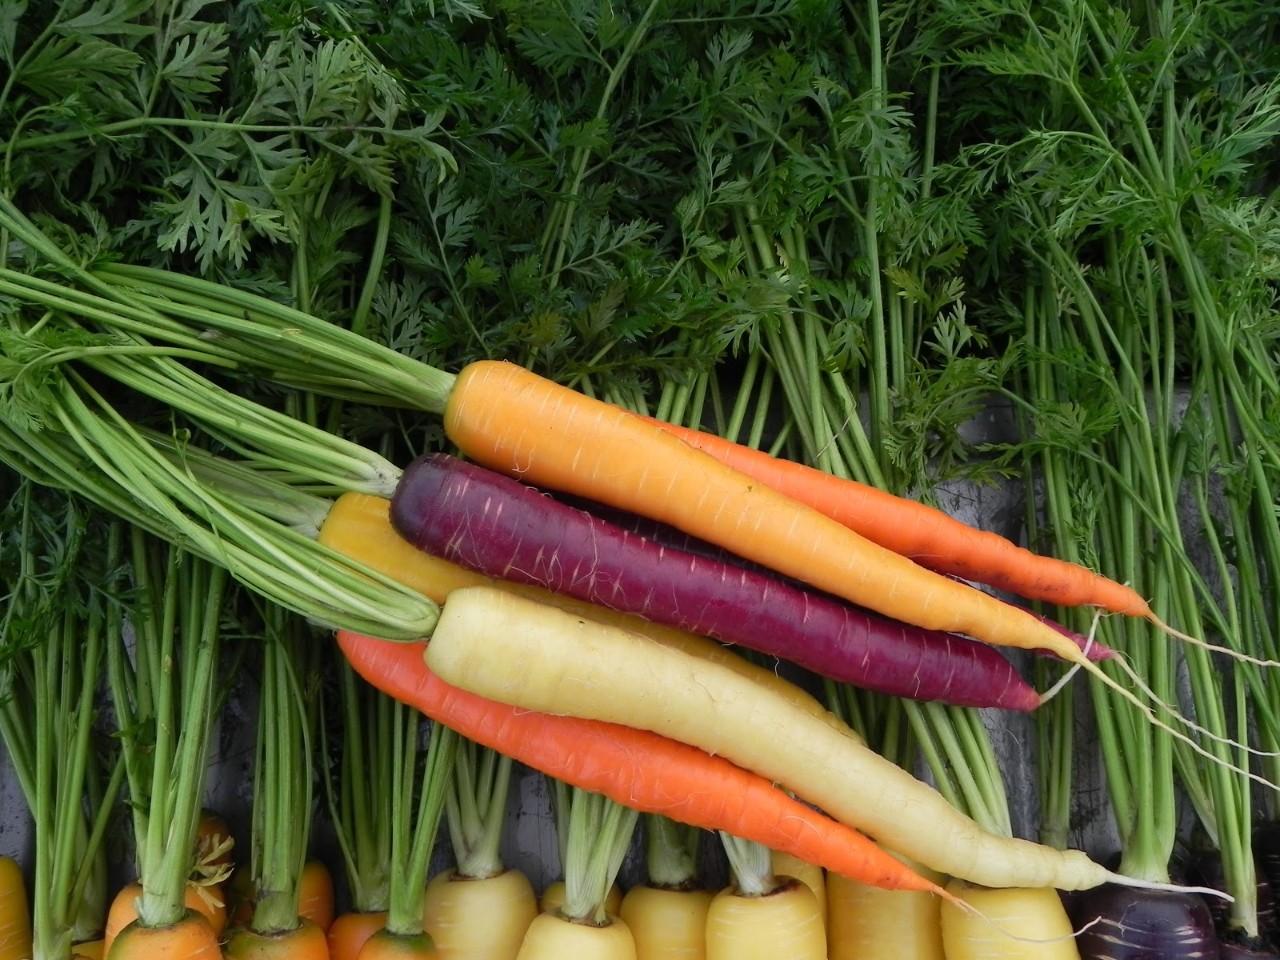 group of purple, orange, and white carrots